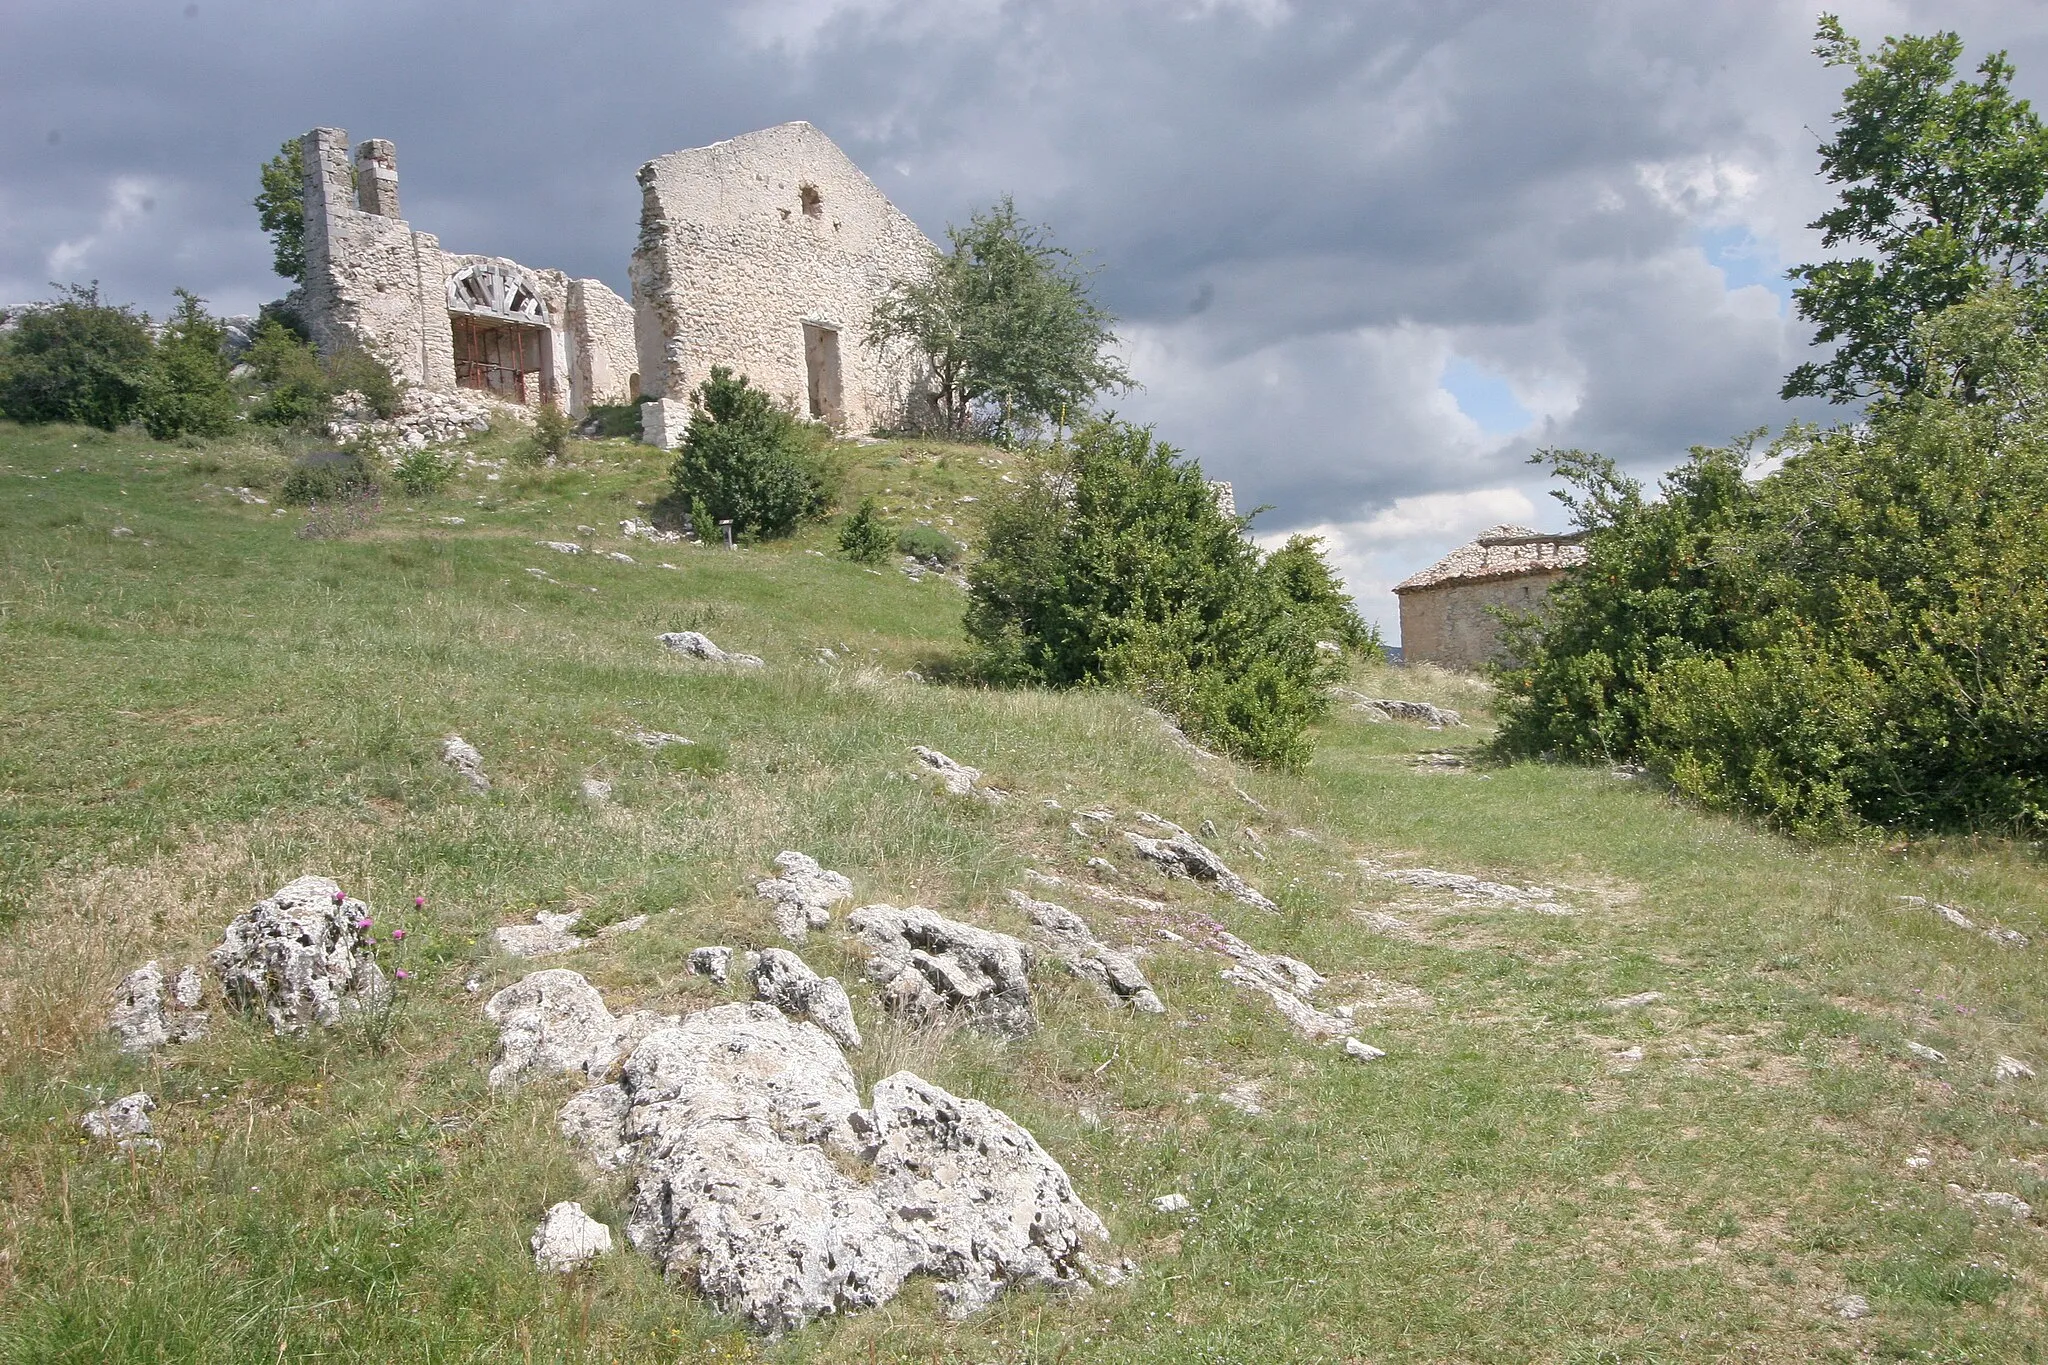 Photo showing: Châteauneuf-lès-Moustiers
Camera location 43° 48′ 42.93″ N, 6° 20′ 21.61″ E View this and other nearby images on: OpenStreetMap 43.811924;    6.339337